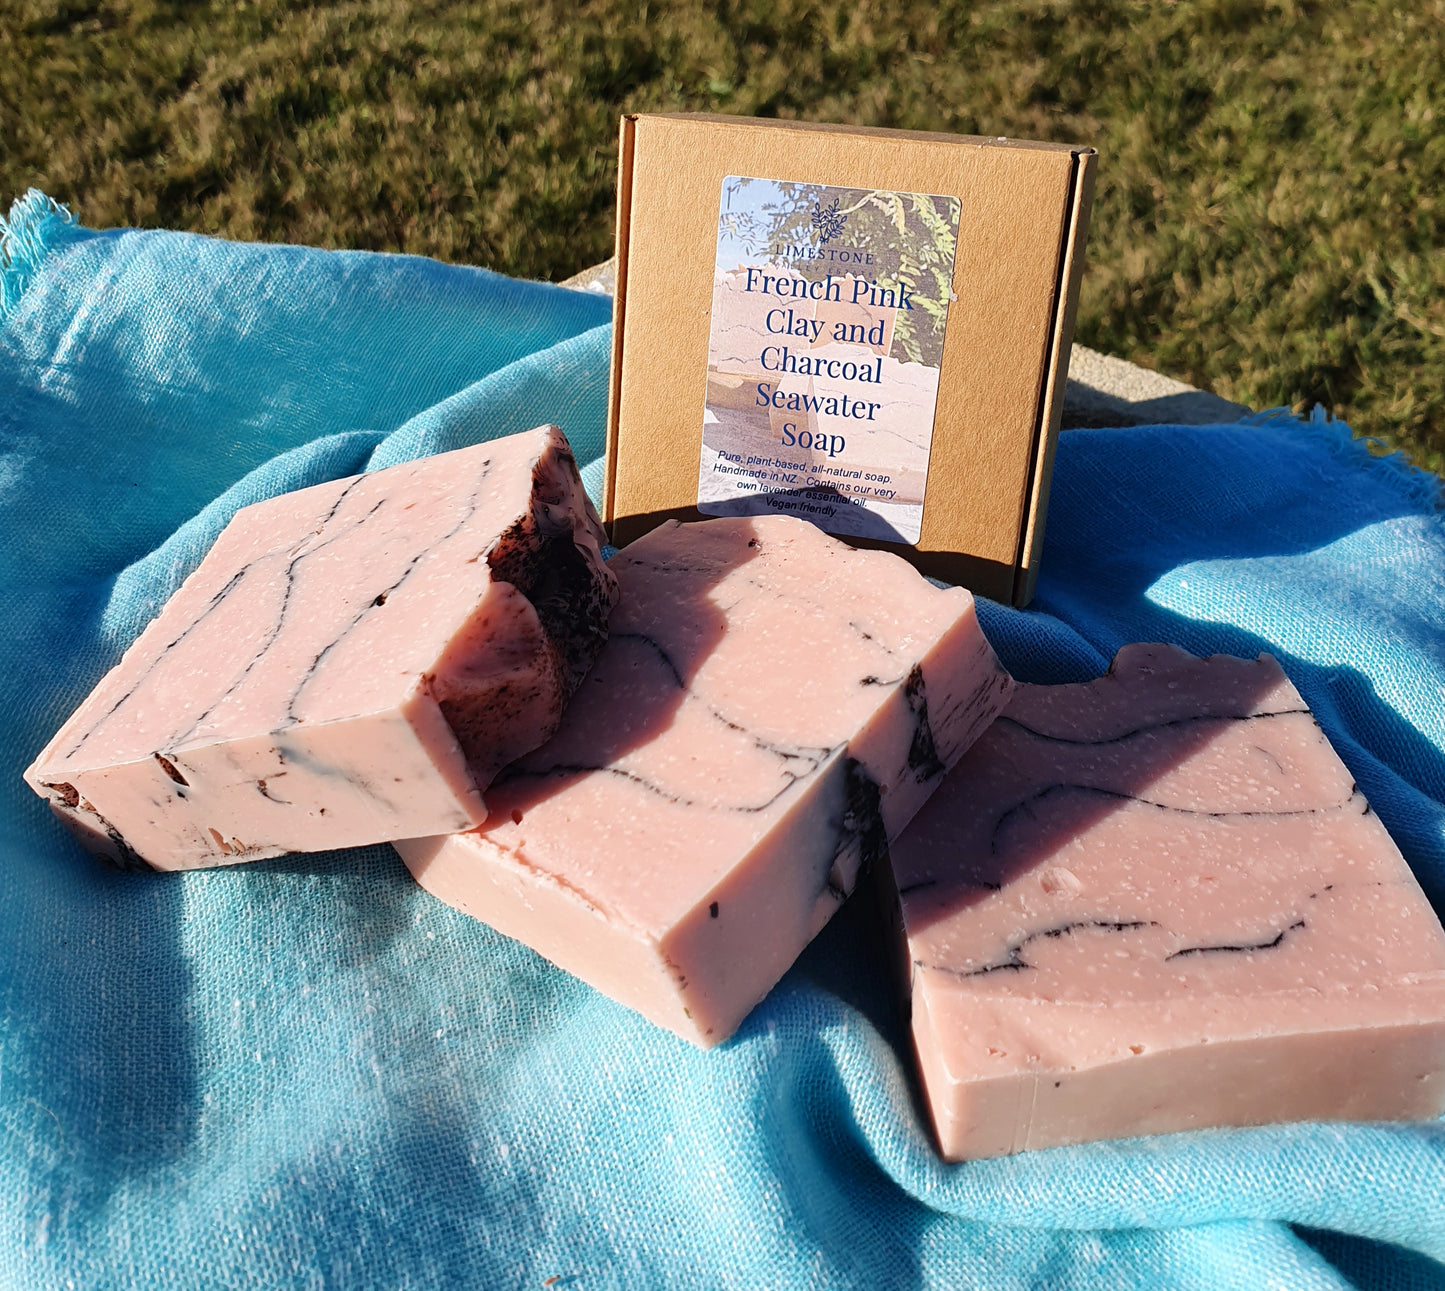 Pink Clay and Charcoal Seawater Soap